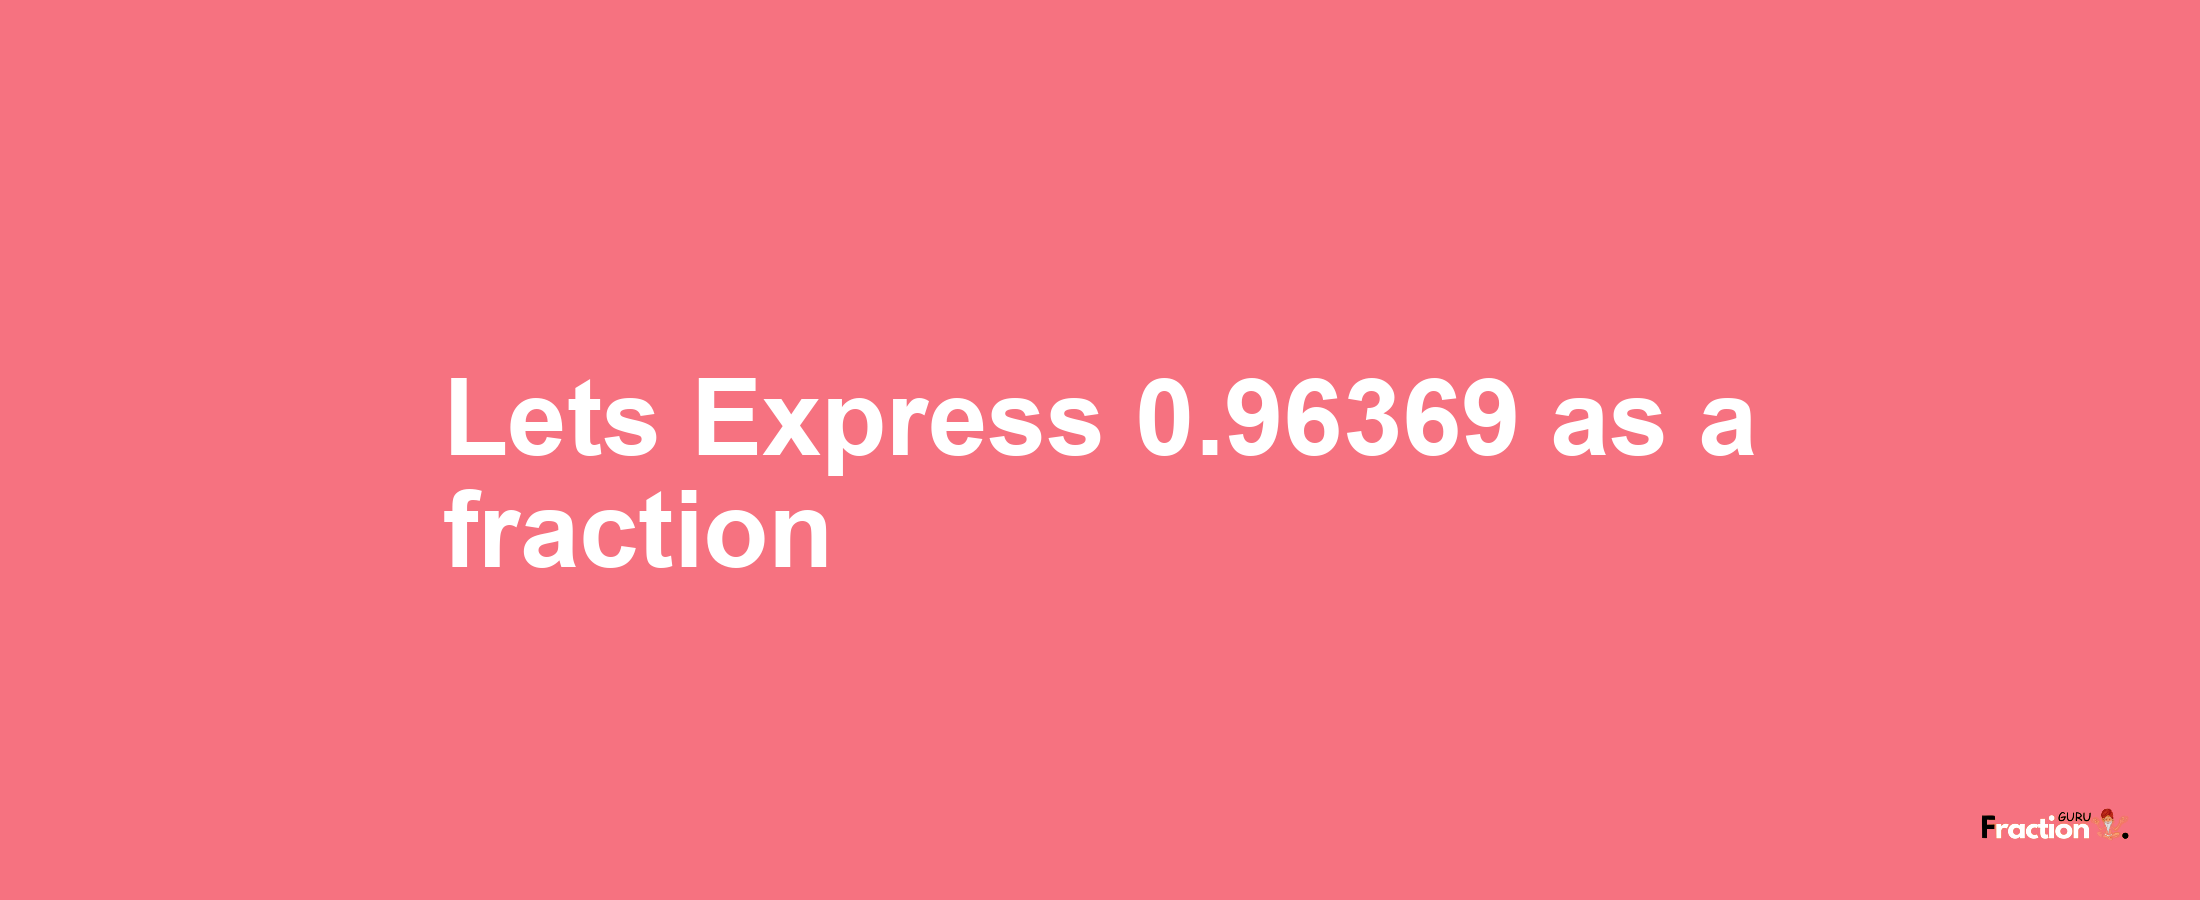 Lets Express 0.96369 as afraction